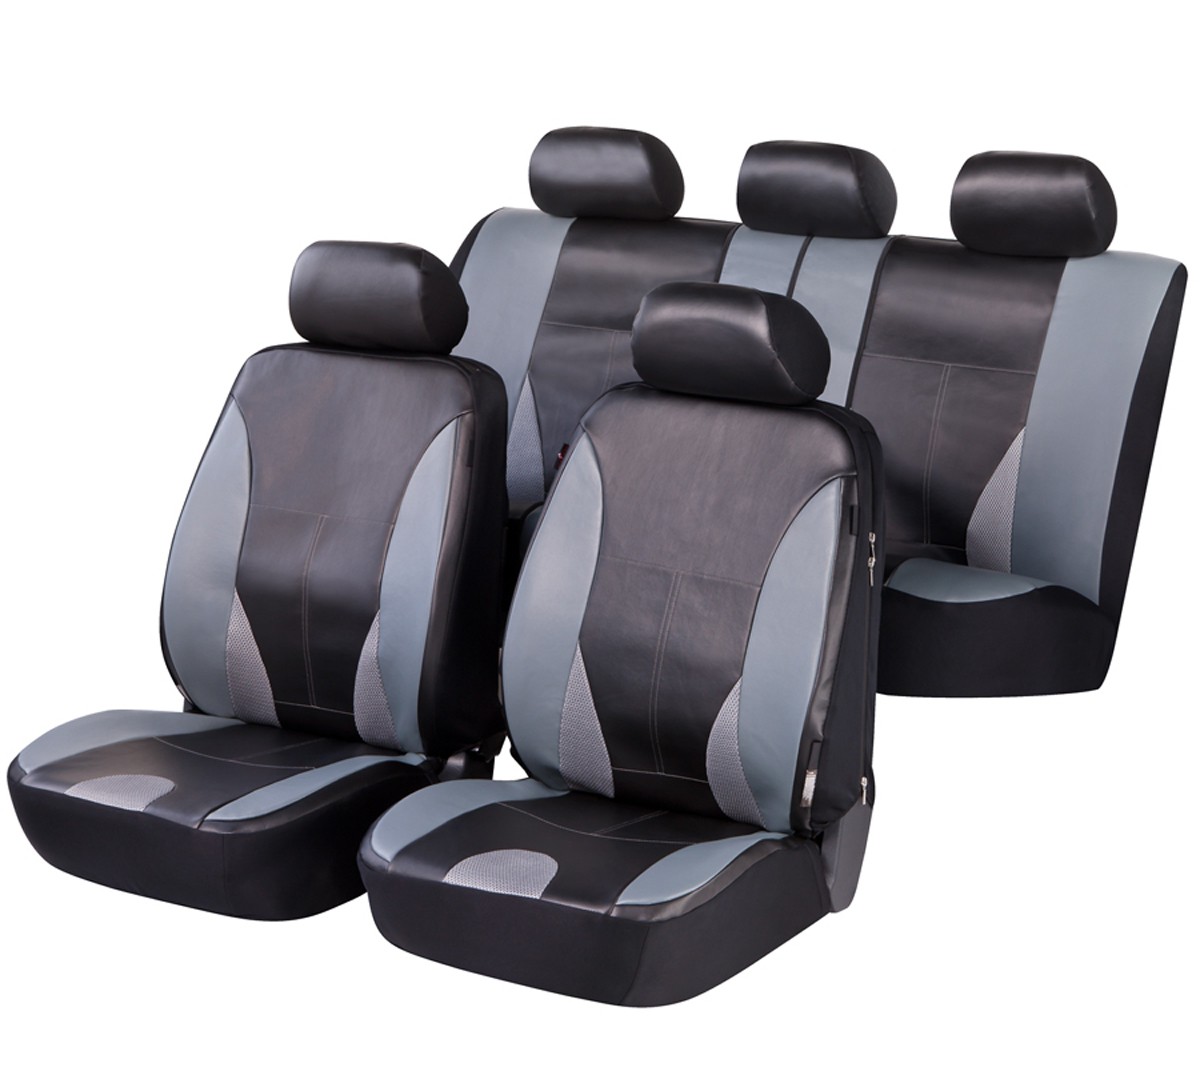 Hyundai i20 Car seat covers , Proven Quality carseatcovers24.co.uk